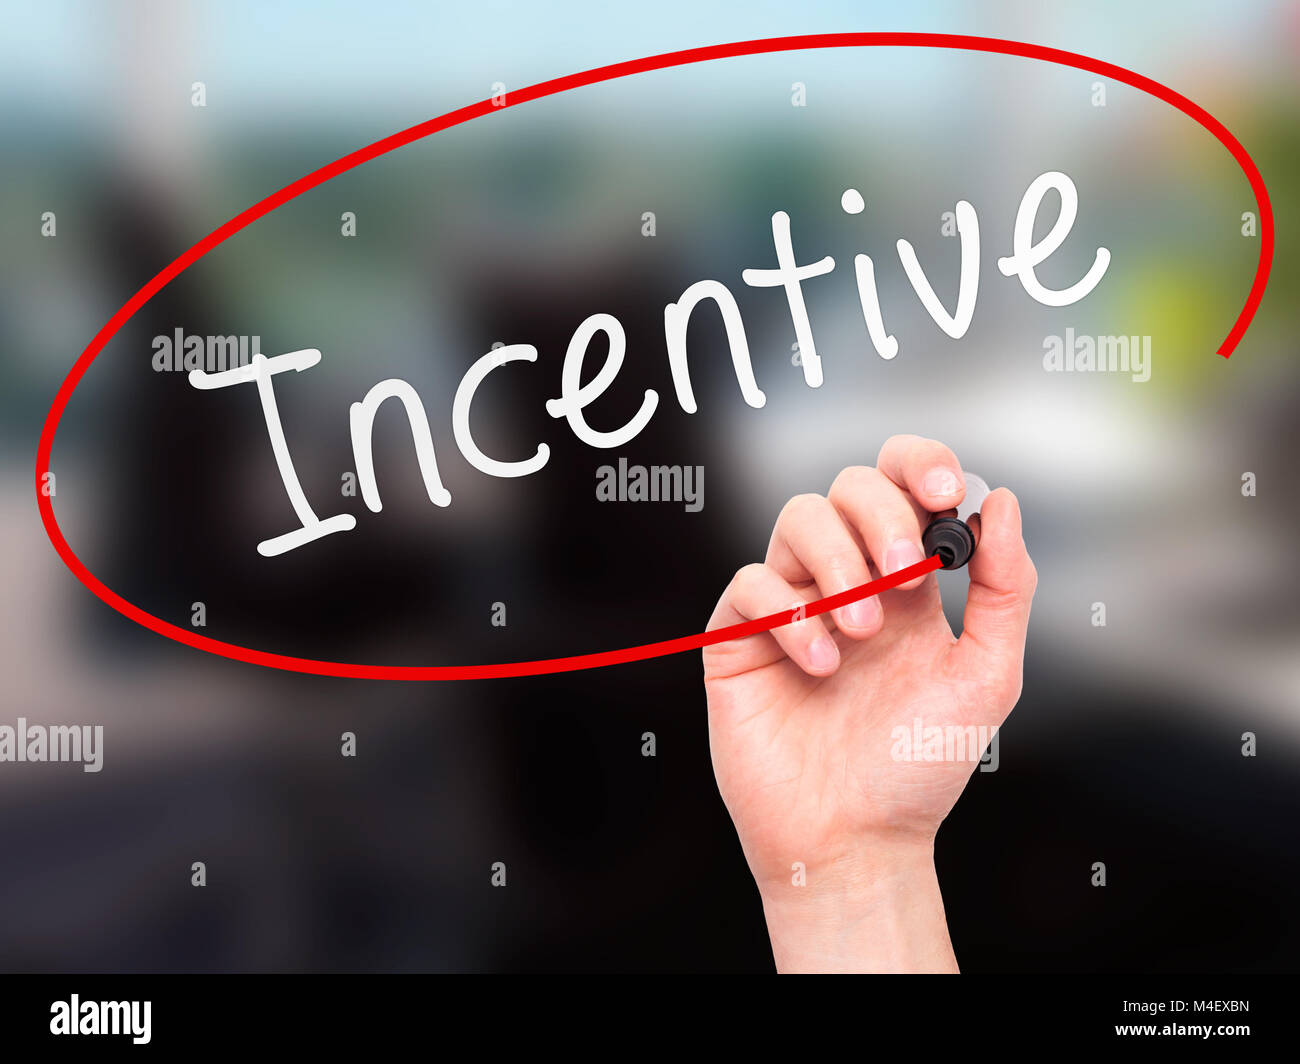 Man Hand writing Incentive with marker on transparent wipe board Stock Photo